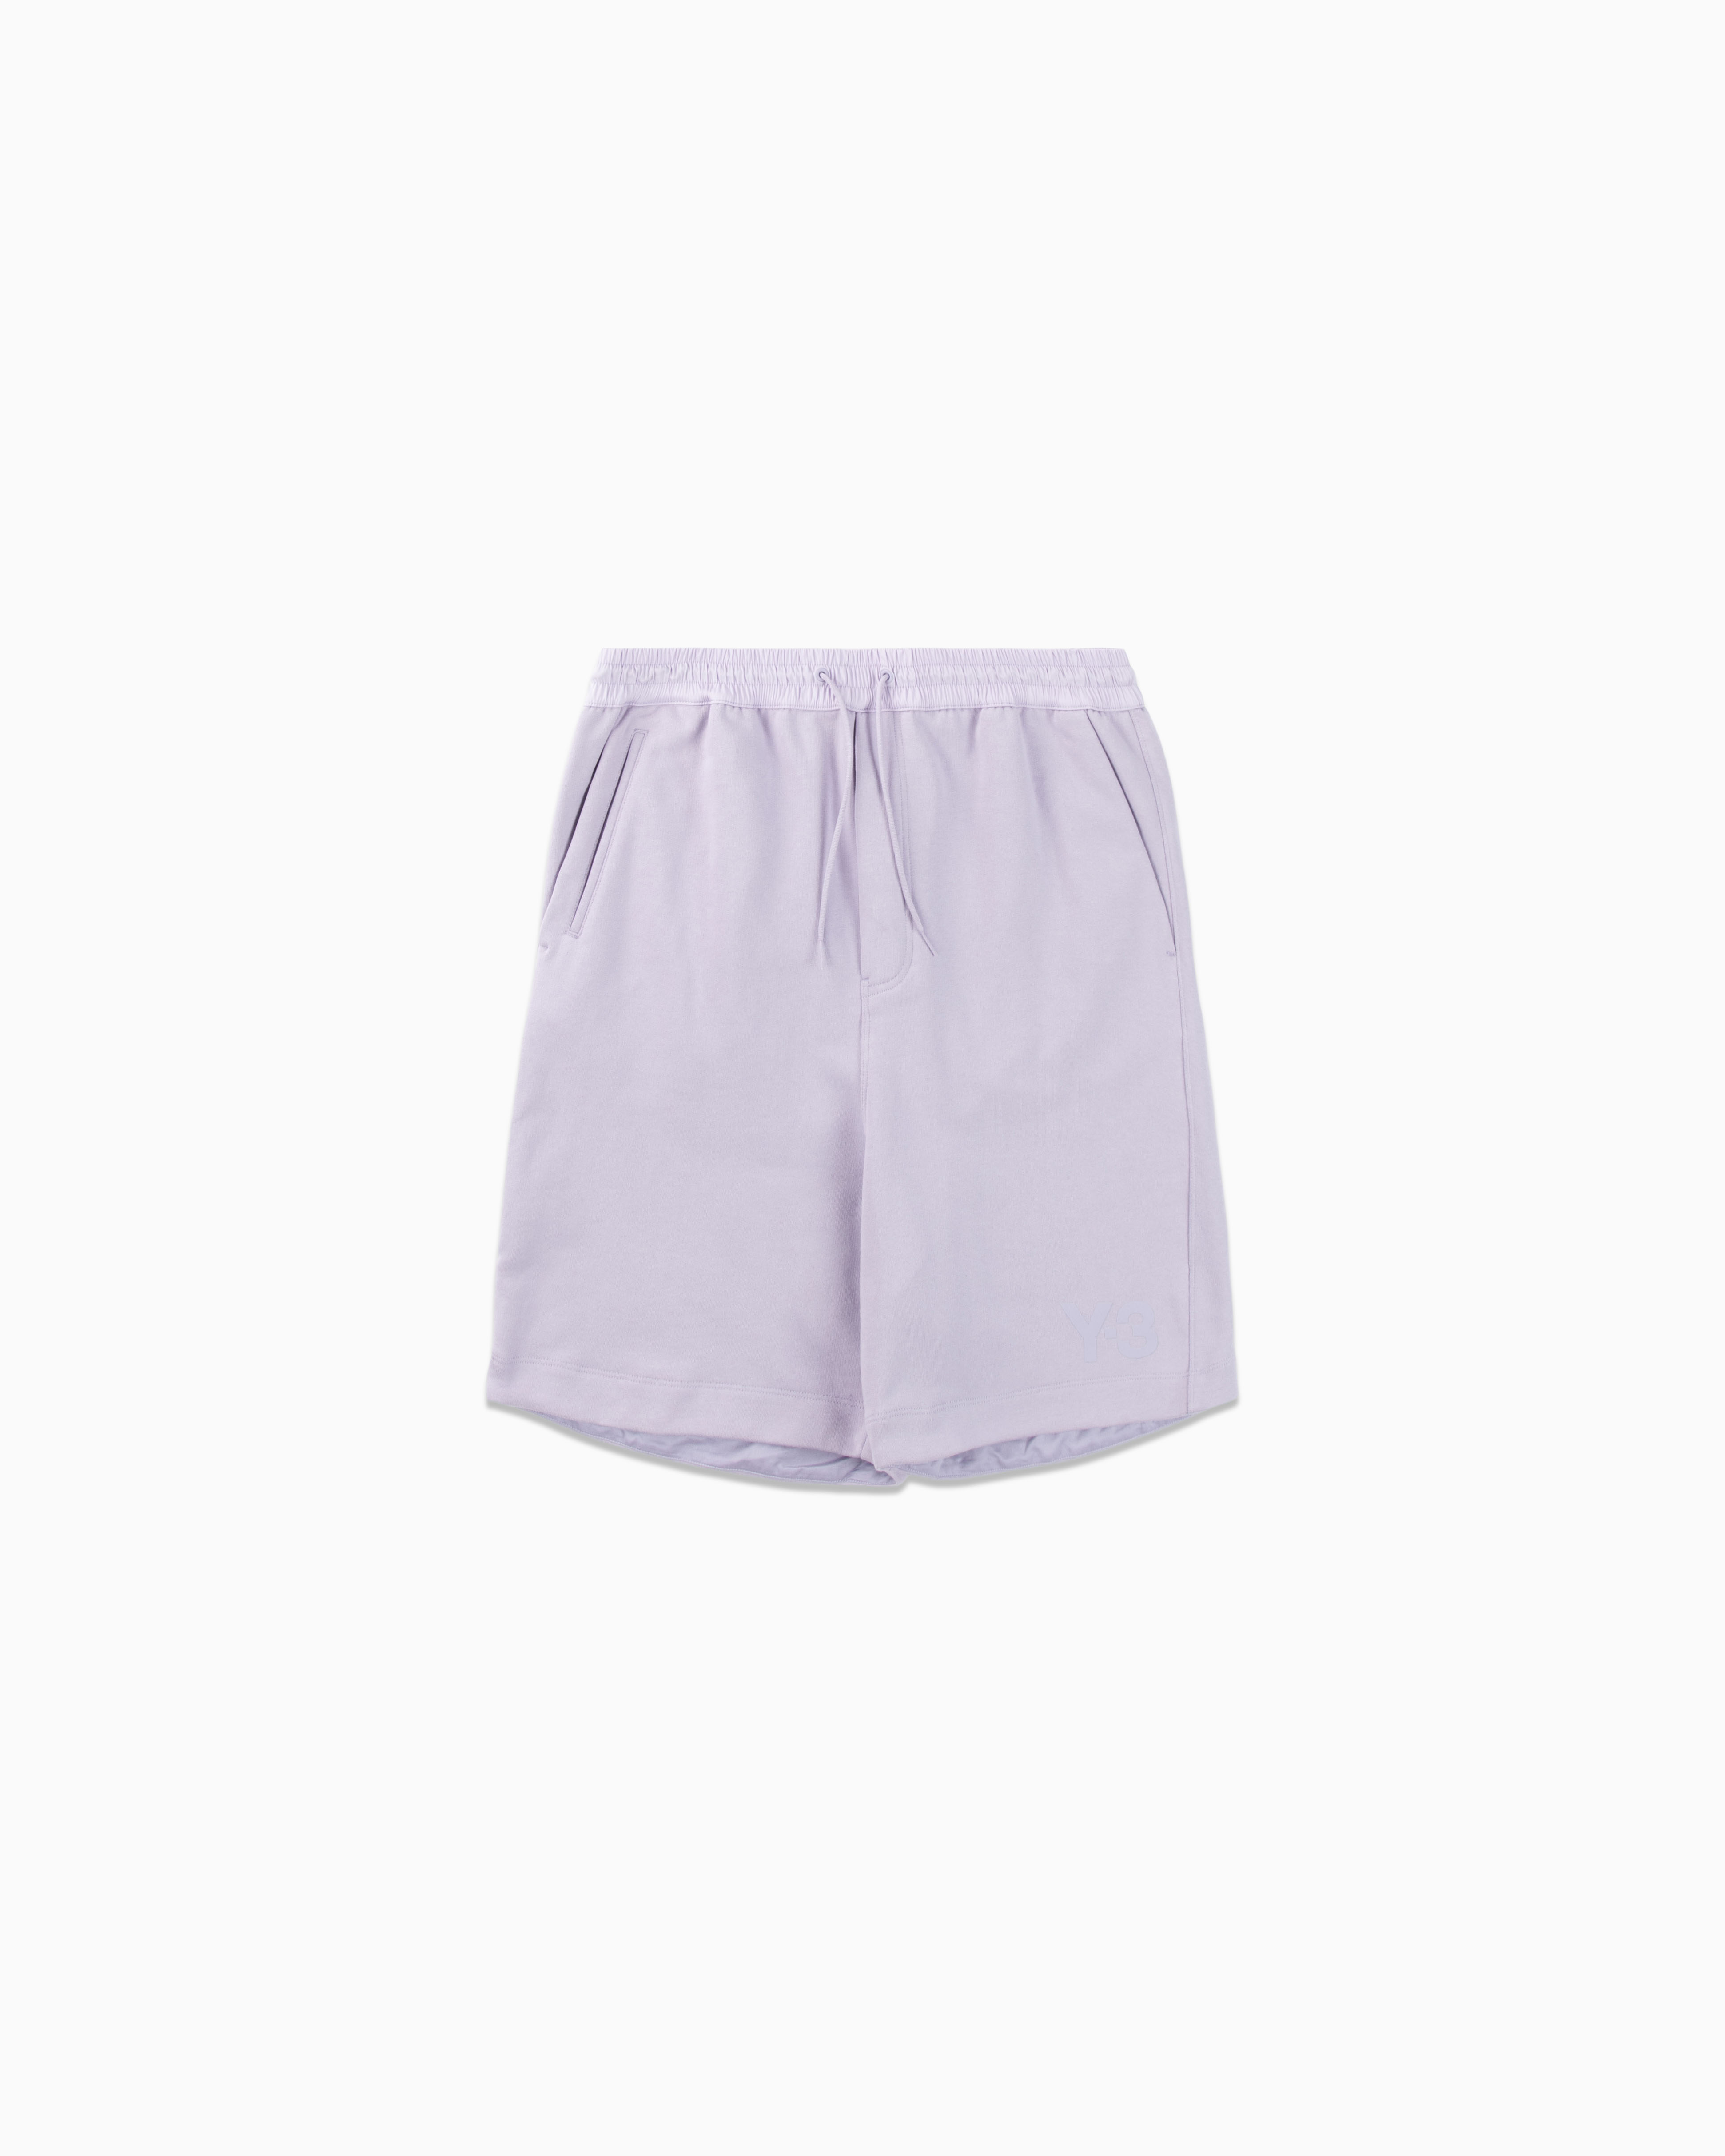 M Classic Terry Shorts Y-3 Bottoms Shorts Purple